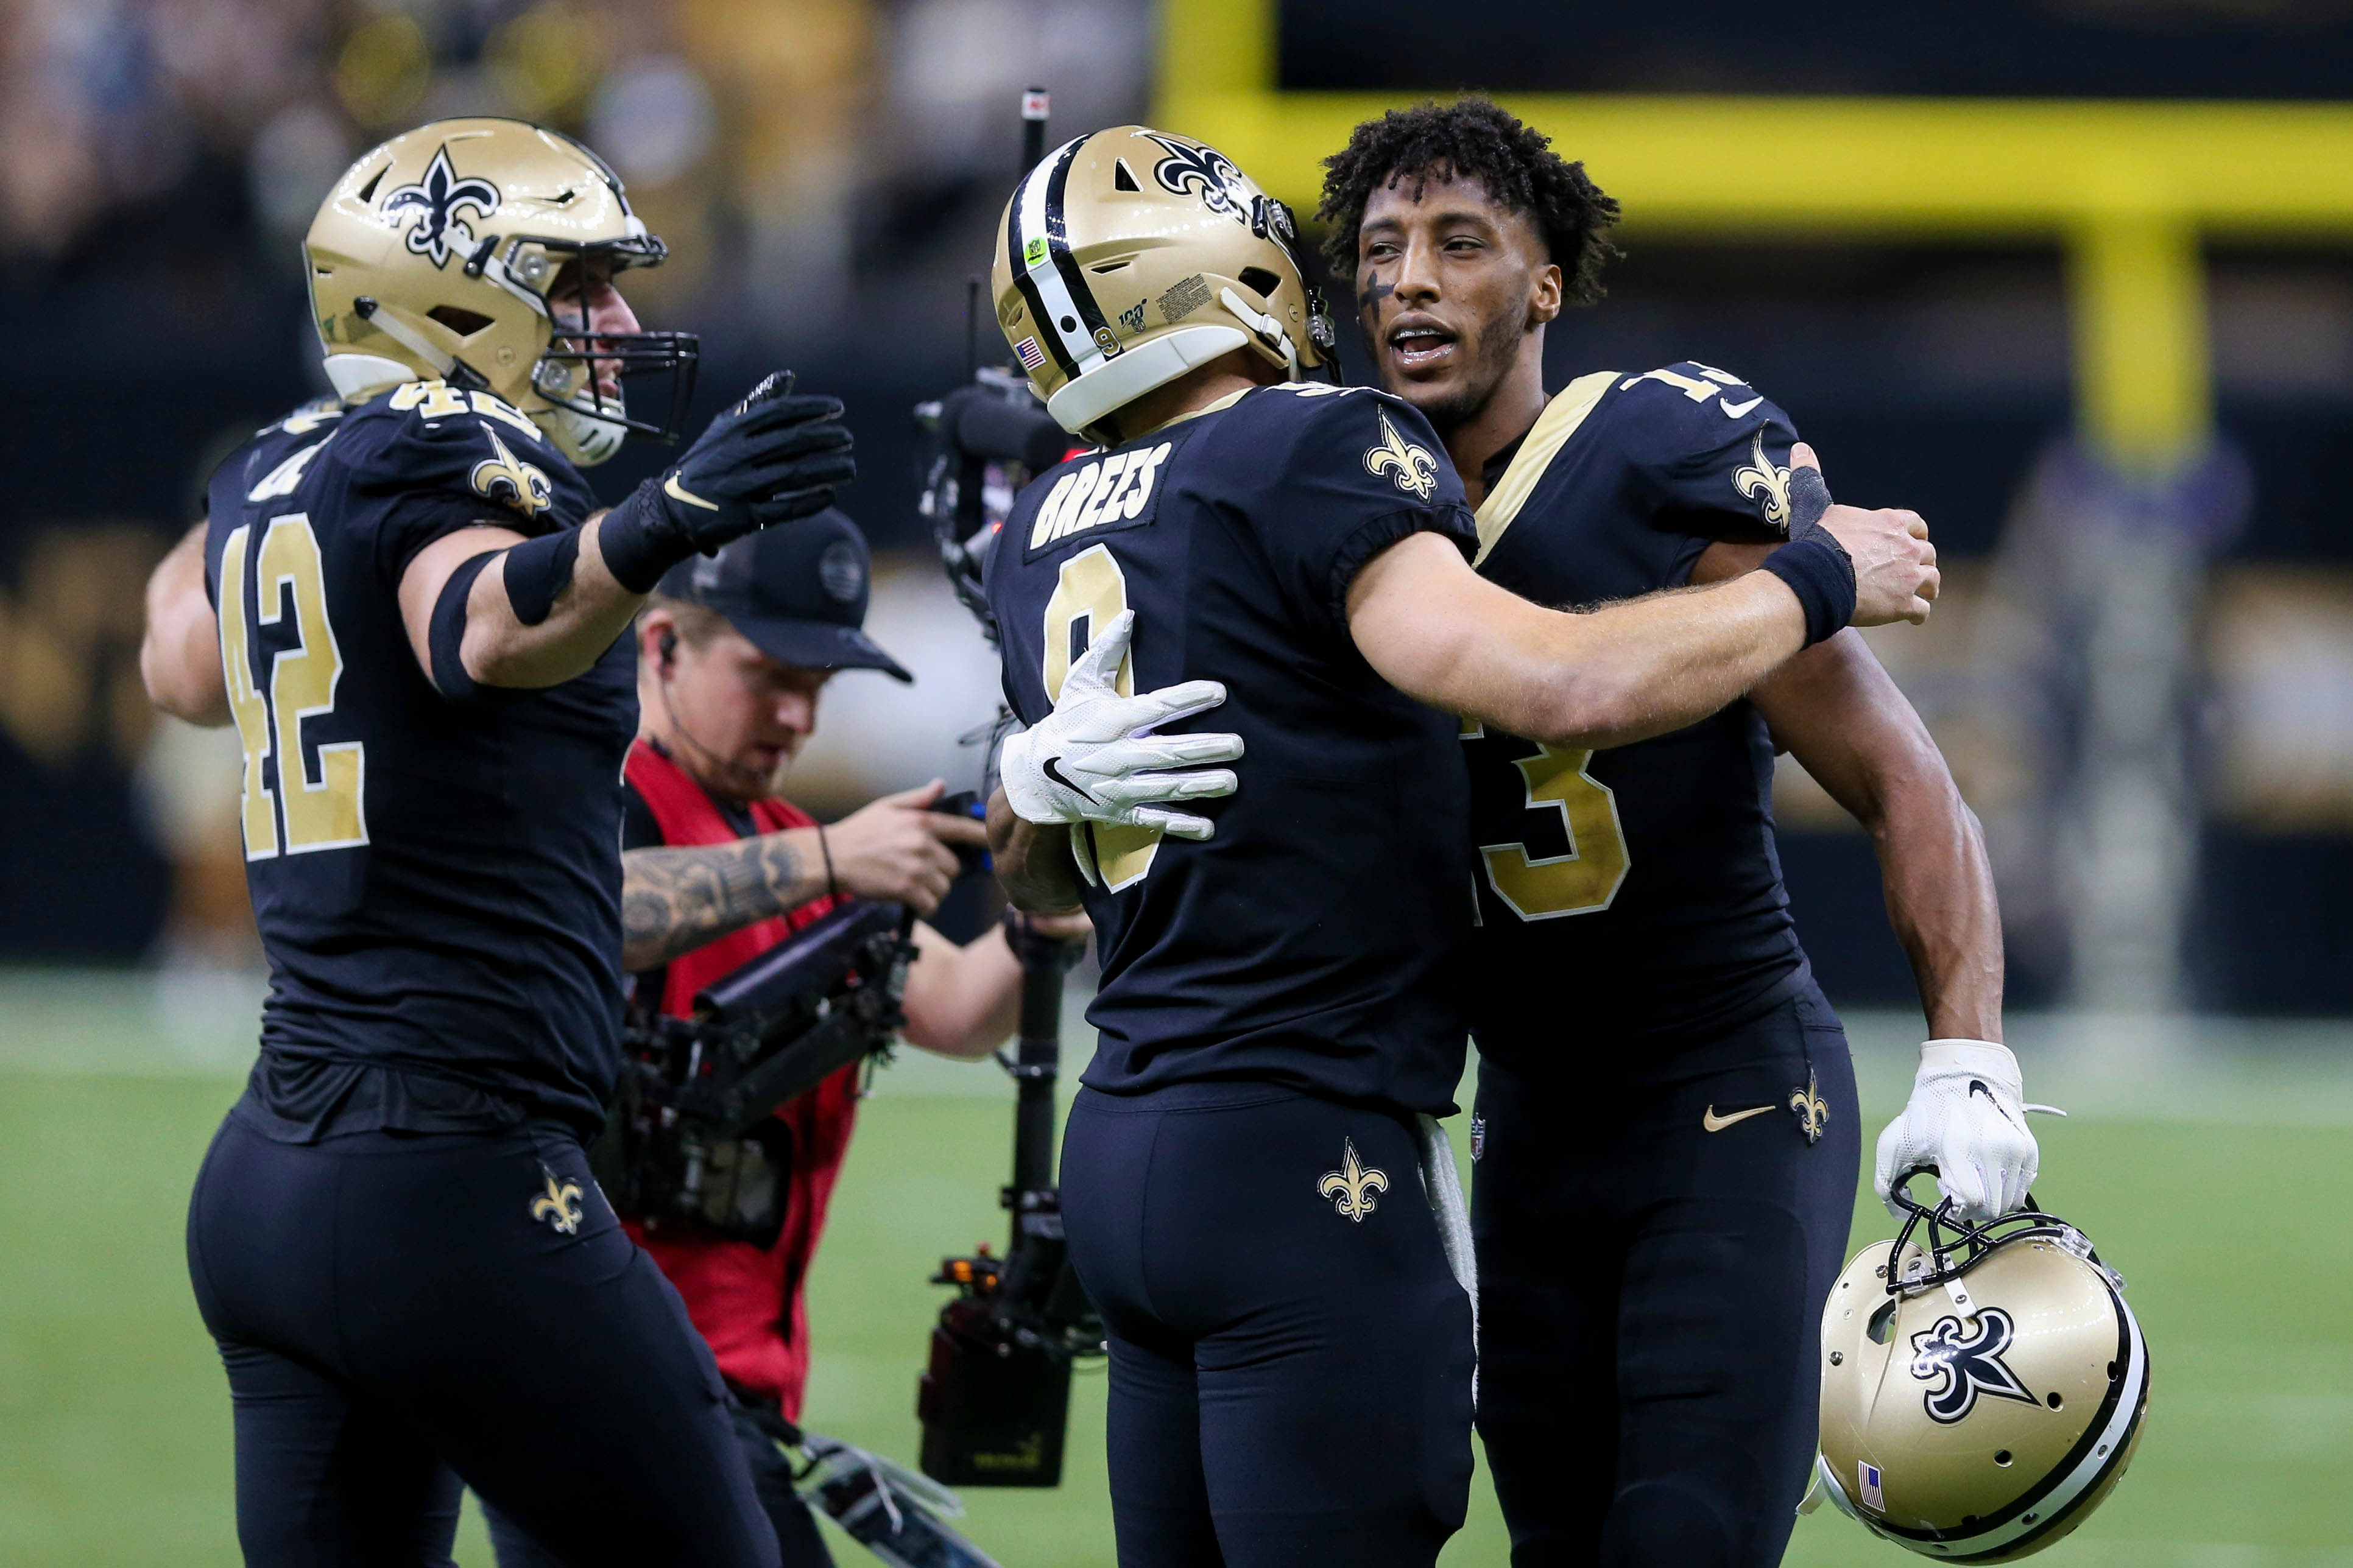 New Orleans Saints Players were "Dubbed and Snubbed" in Pro Bowl Voting